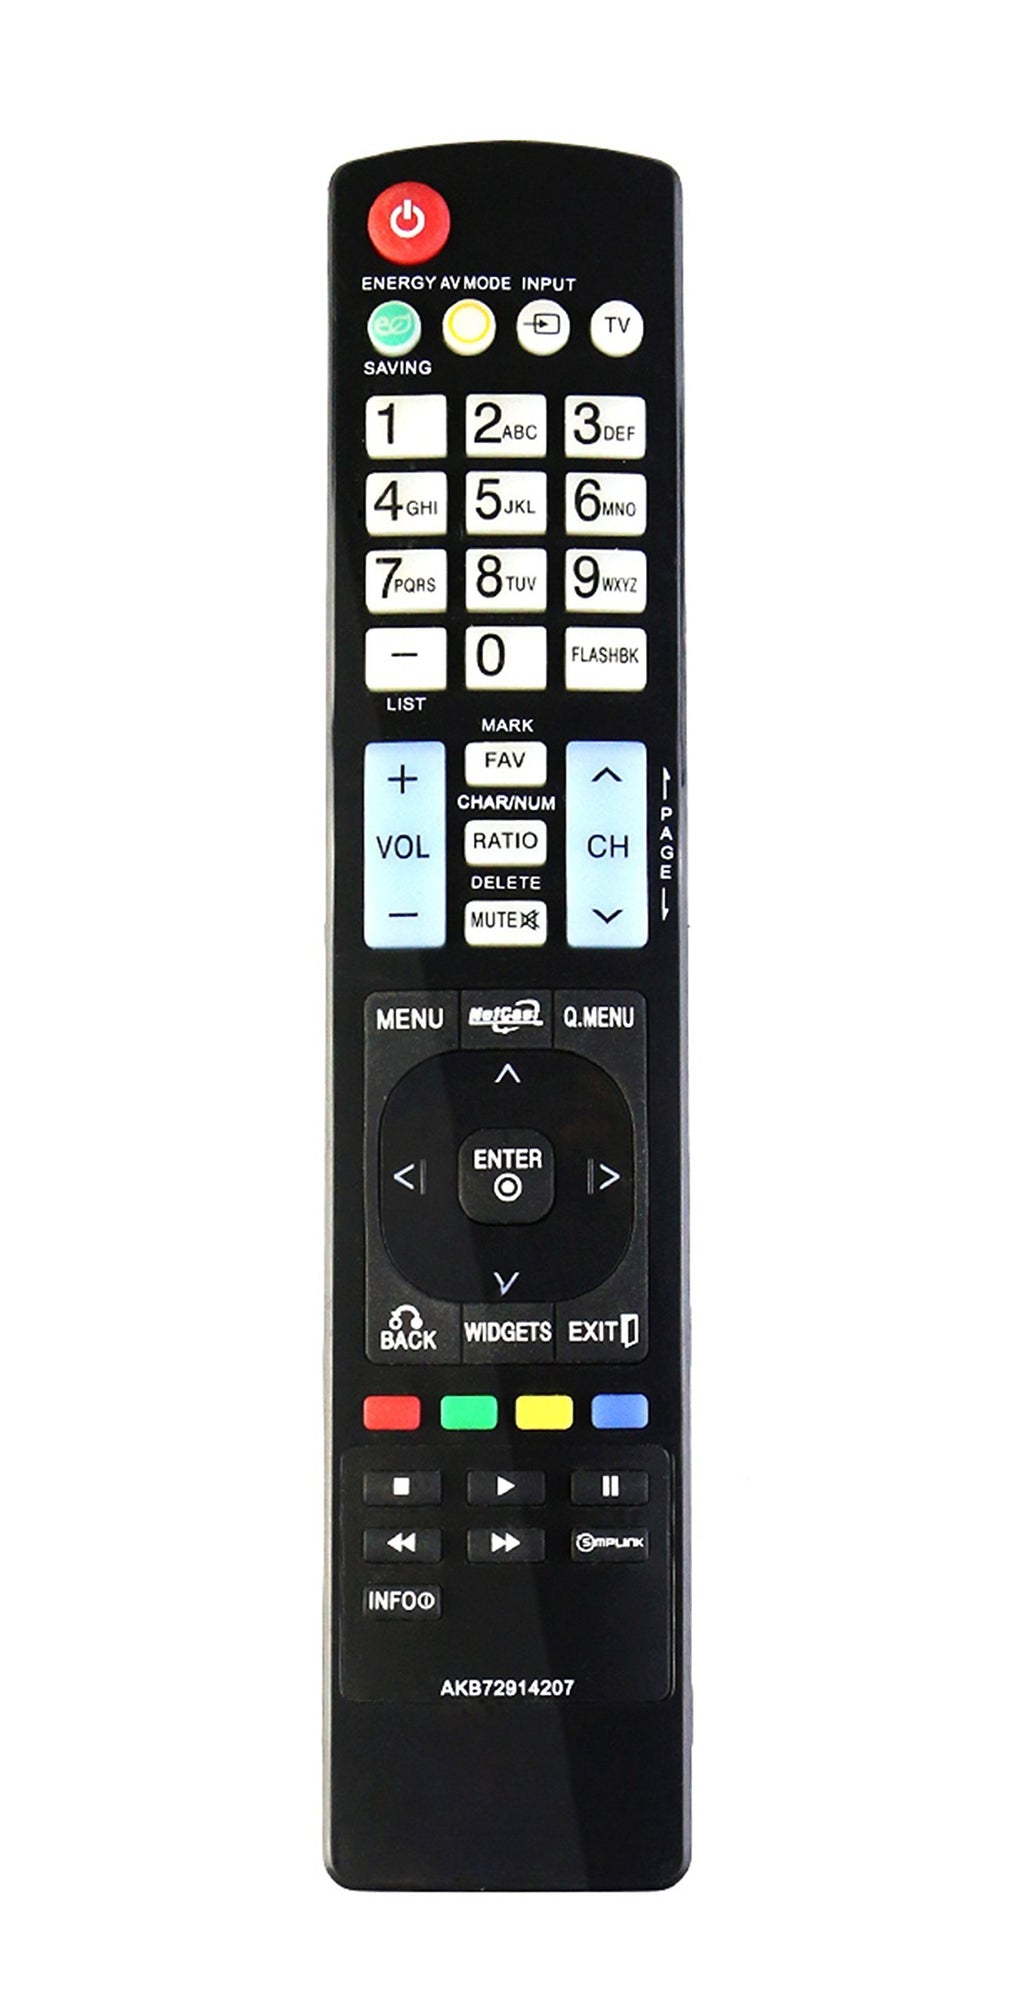 Vinabty New AKB72914207 Replace Remote fit for LG AKB72914003 AKB72914240 AKB72914201 AKB72914238 AKB72914209 32LD550 32LD550-UB 32LD550UB 42LD550 42LD550UB 42LE5350 46LD550 47LD650 47LD650UA 52LD550